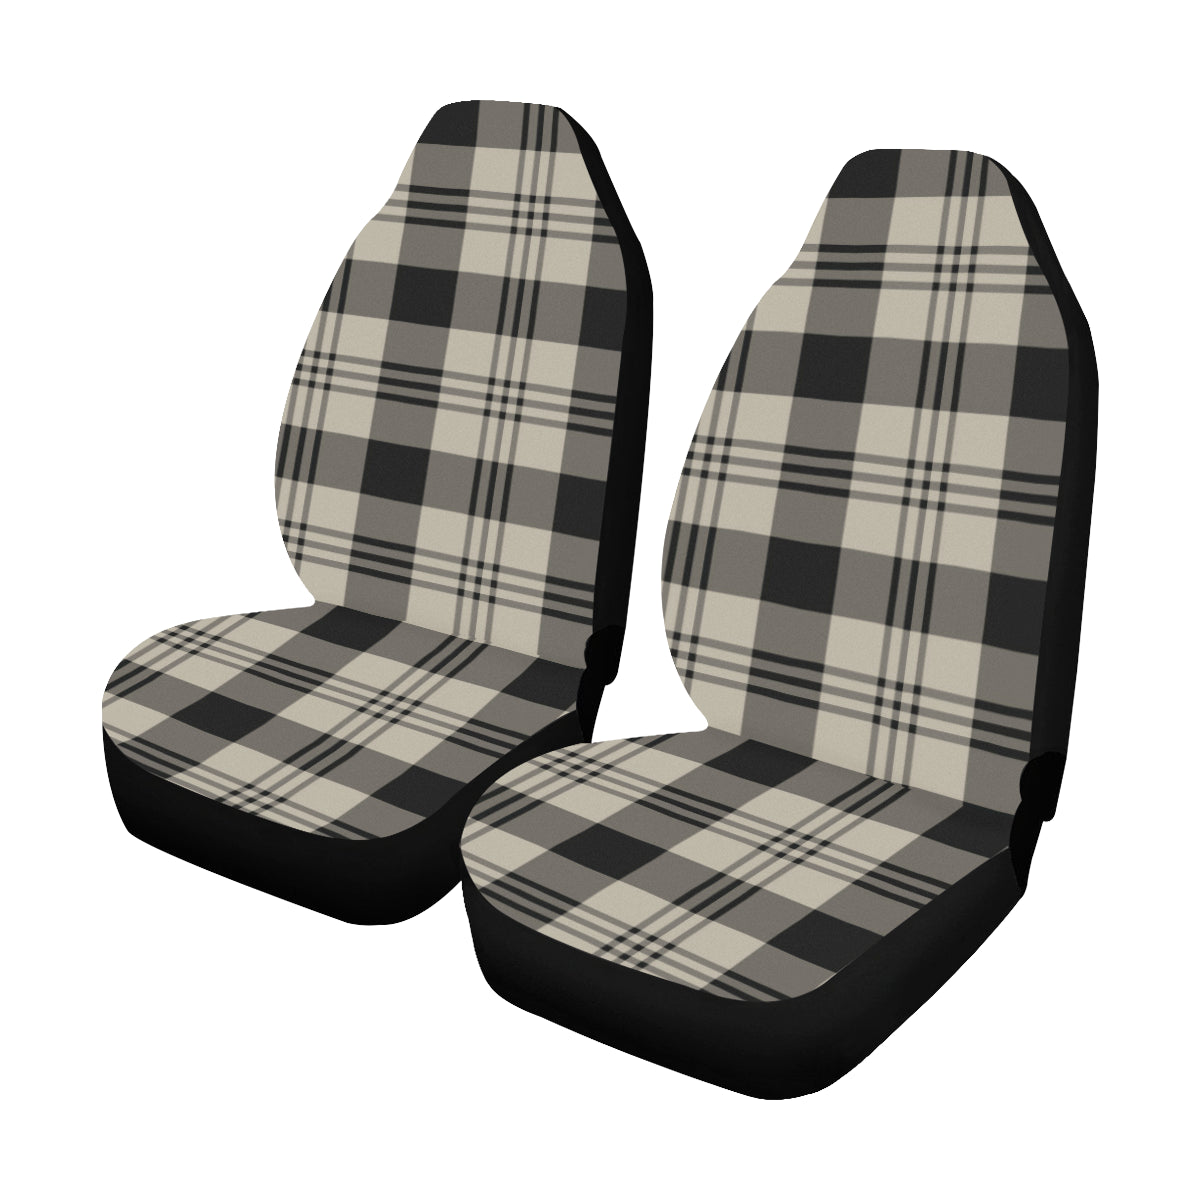 Buffalo Plaid Car Seat Covers 2 pc, Tartan Checks Black Beige Pattern Front Seat Covers, Car SUV Seat Protector Accessory Decoration Starcove Fashion